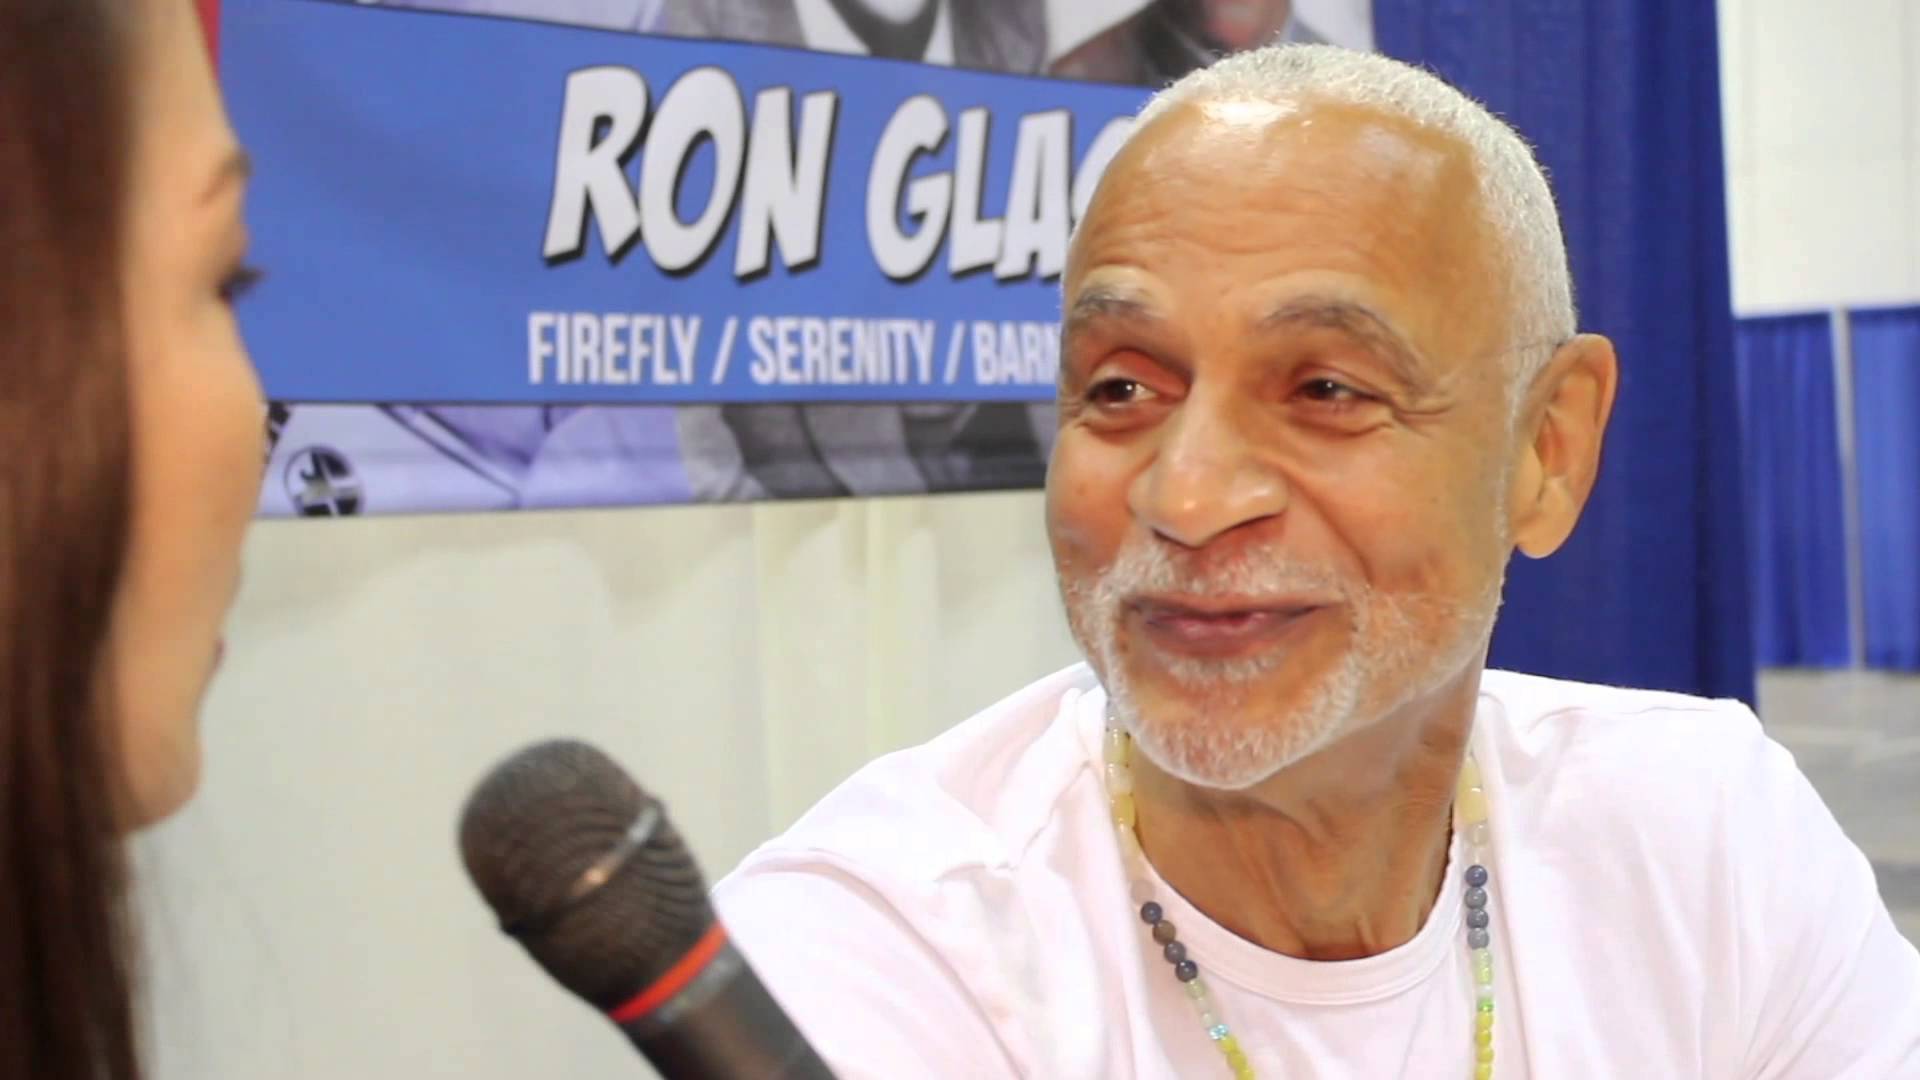 images-of-ron-glass